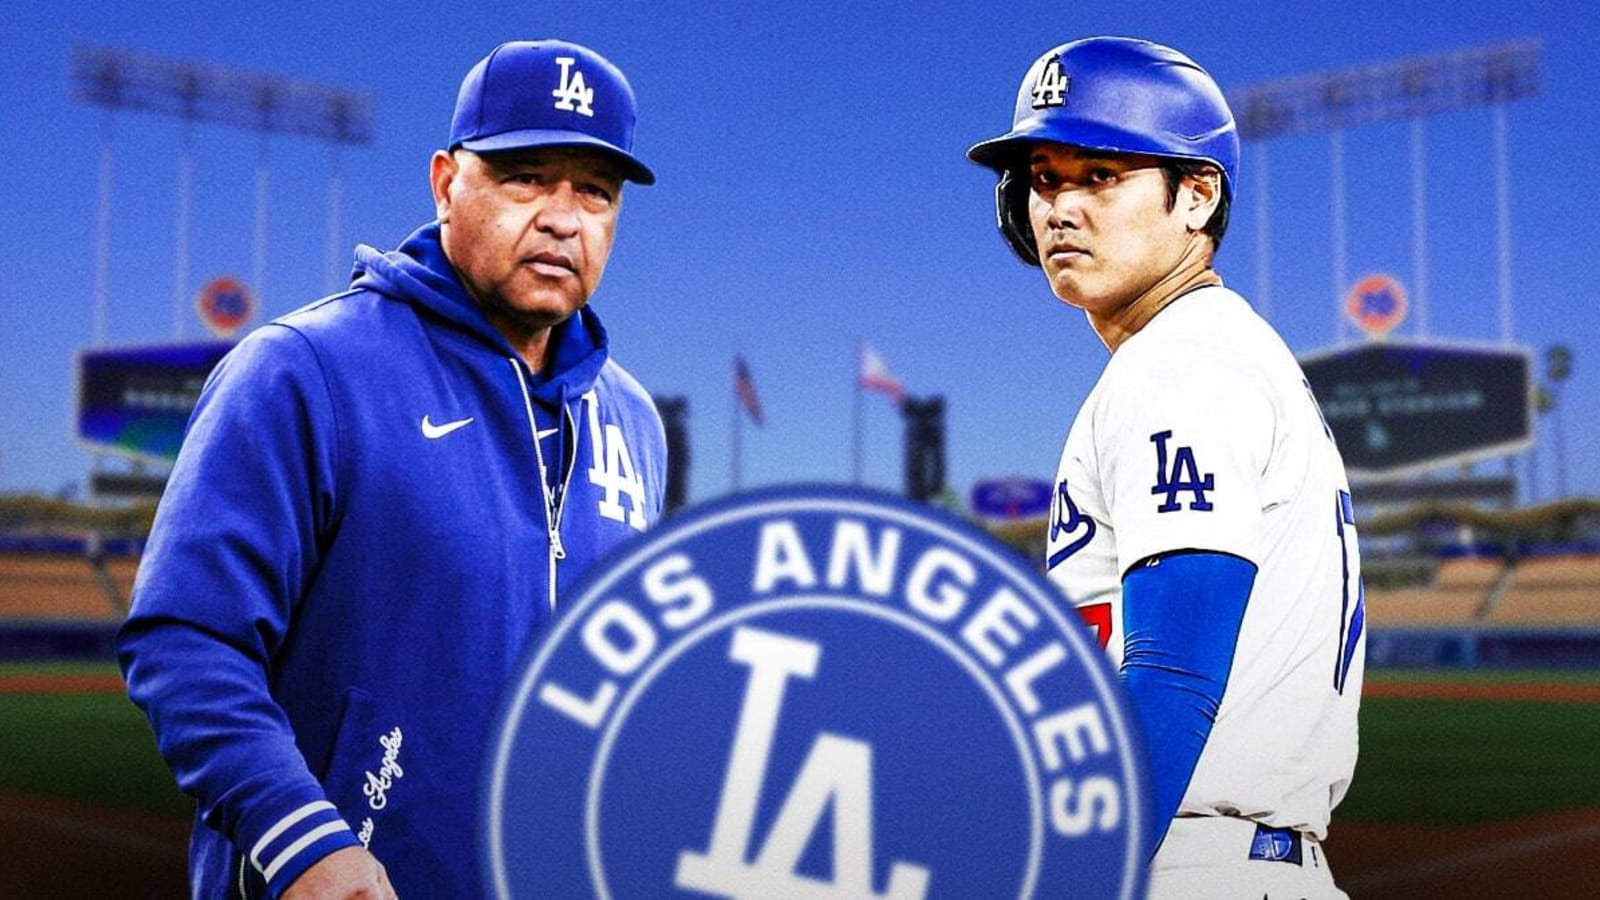 Dodgers manager Dave Roberts’ surprising admission in wake of Shohei Ohtani’s gambling debacle